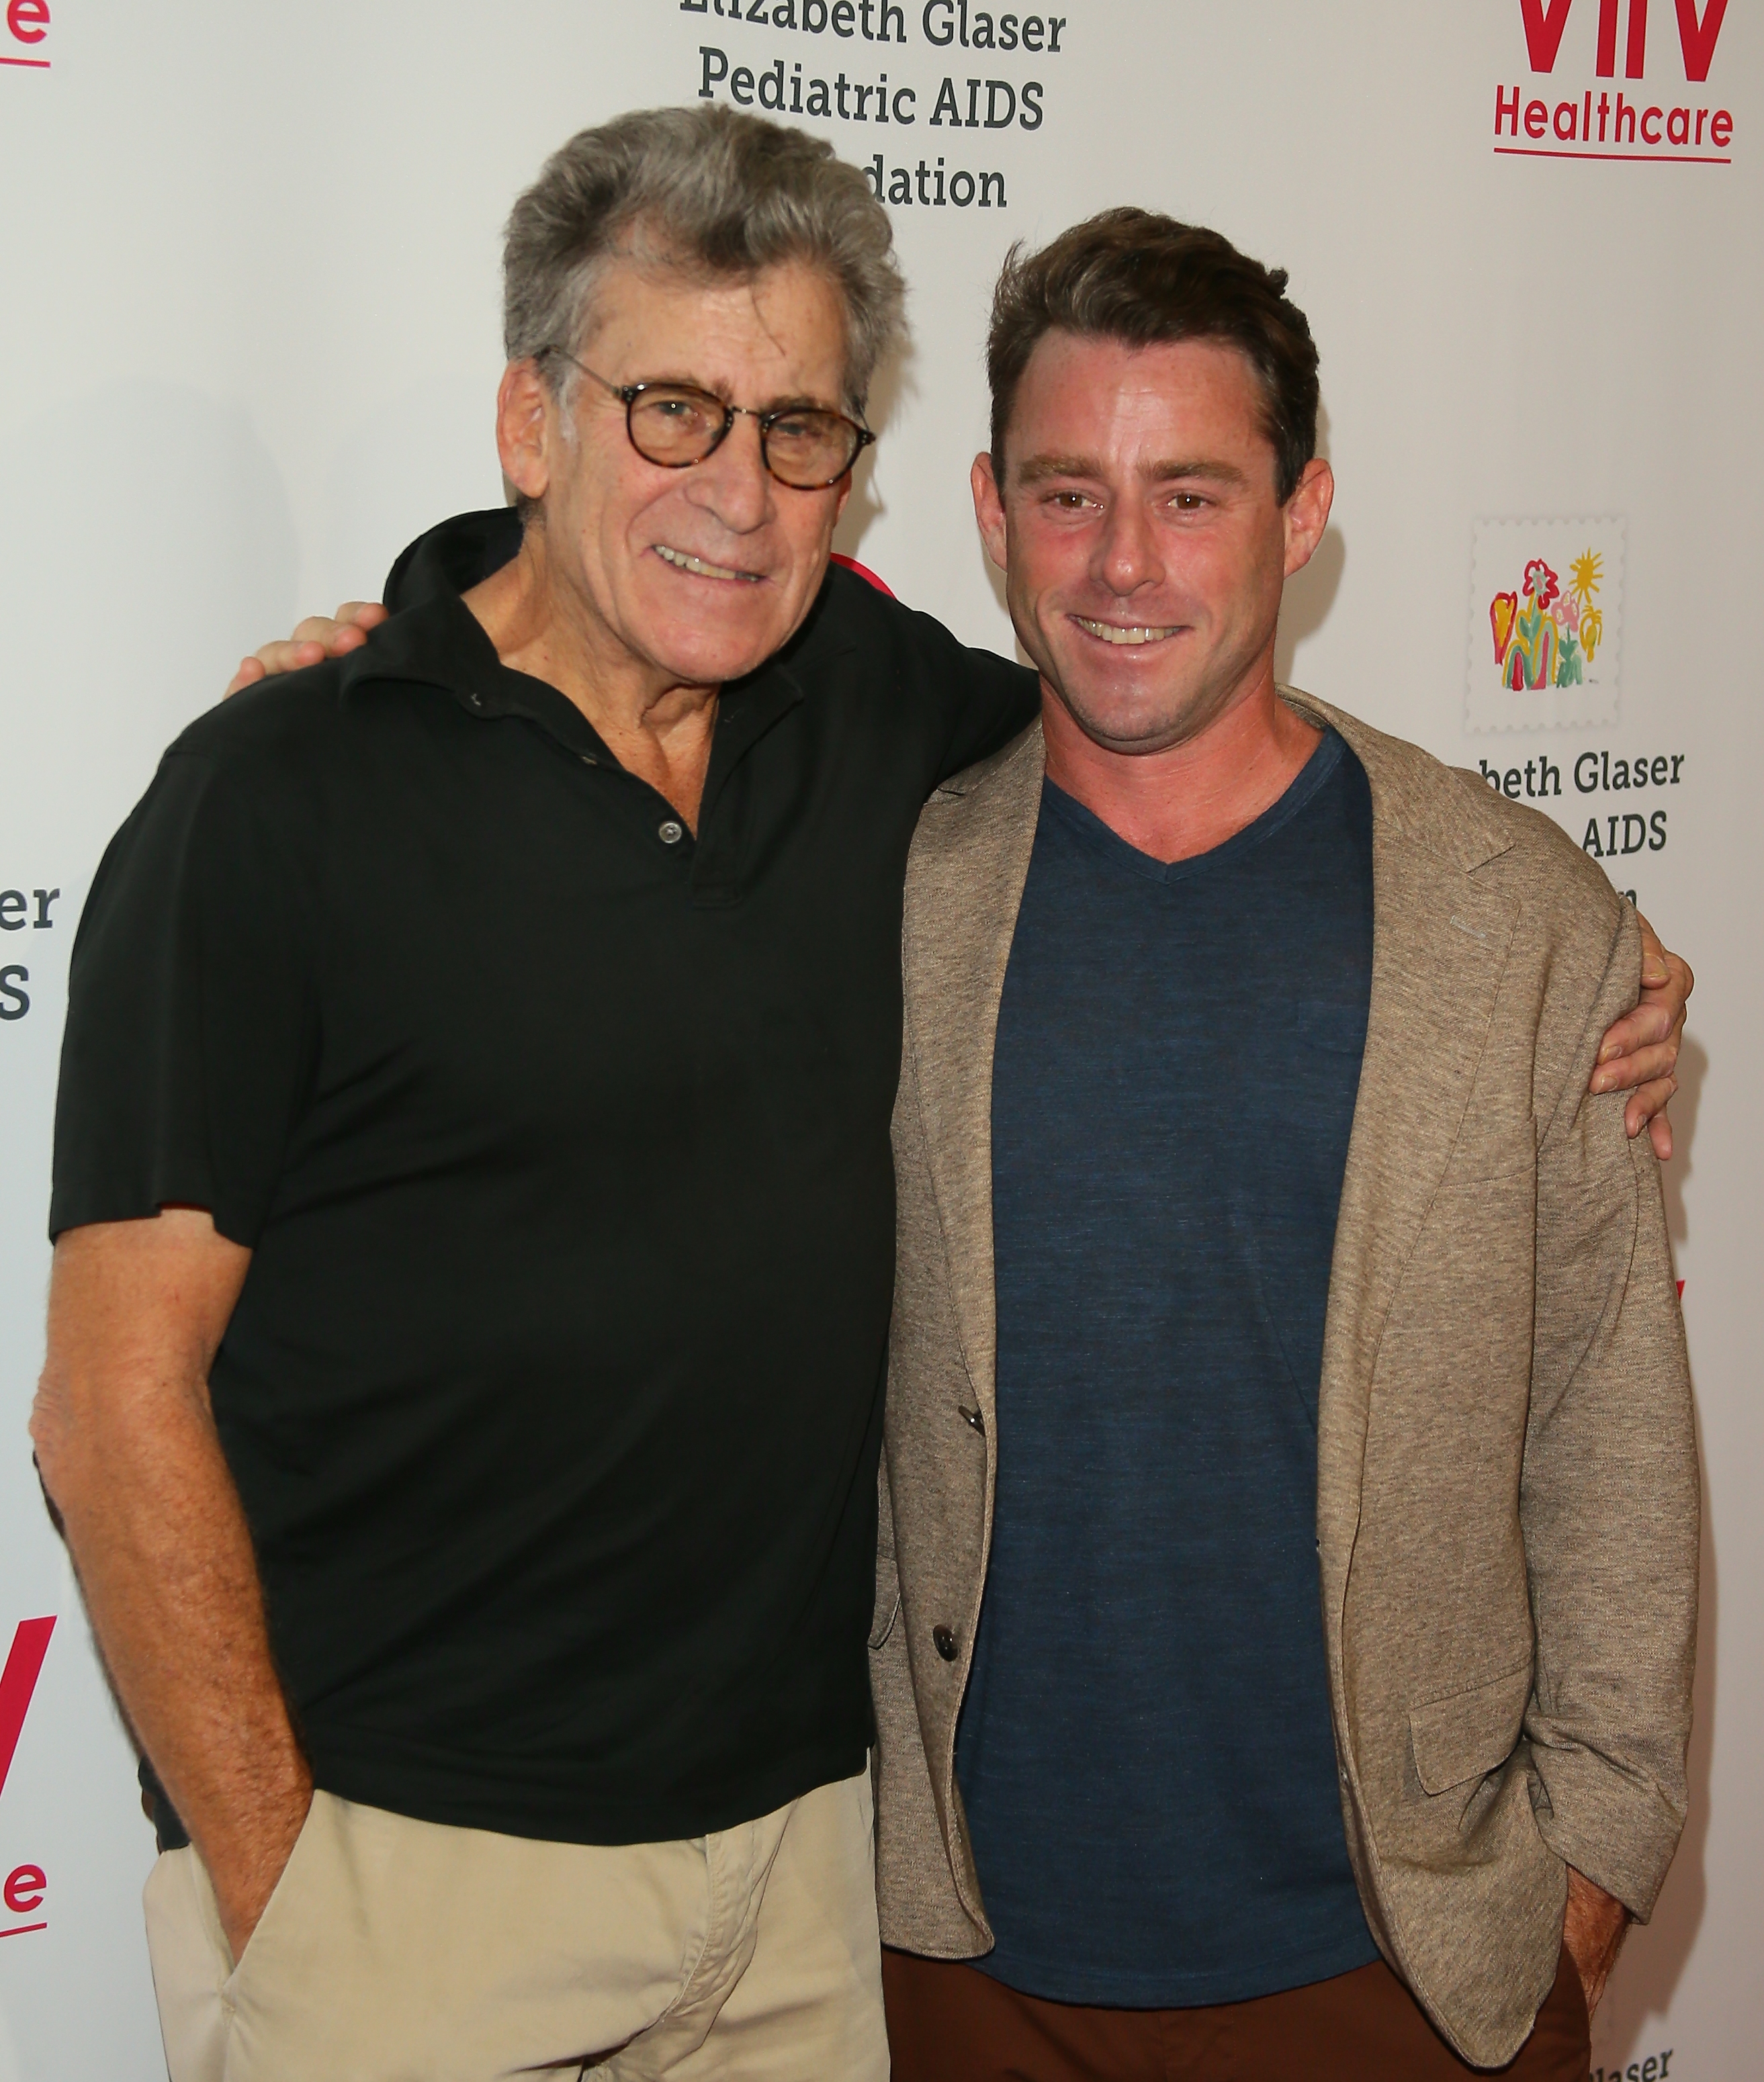 Paul Michael Glaser and his son Jake Glaser attend the Elizabeth Glaser Pediatric AIDS Foundation's 30th Annual A Time for Heroes Family Festival at Smashbox Studios on October 27, 2019 in Culver City, California | Source: Getty Images